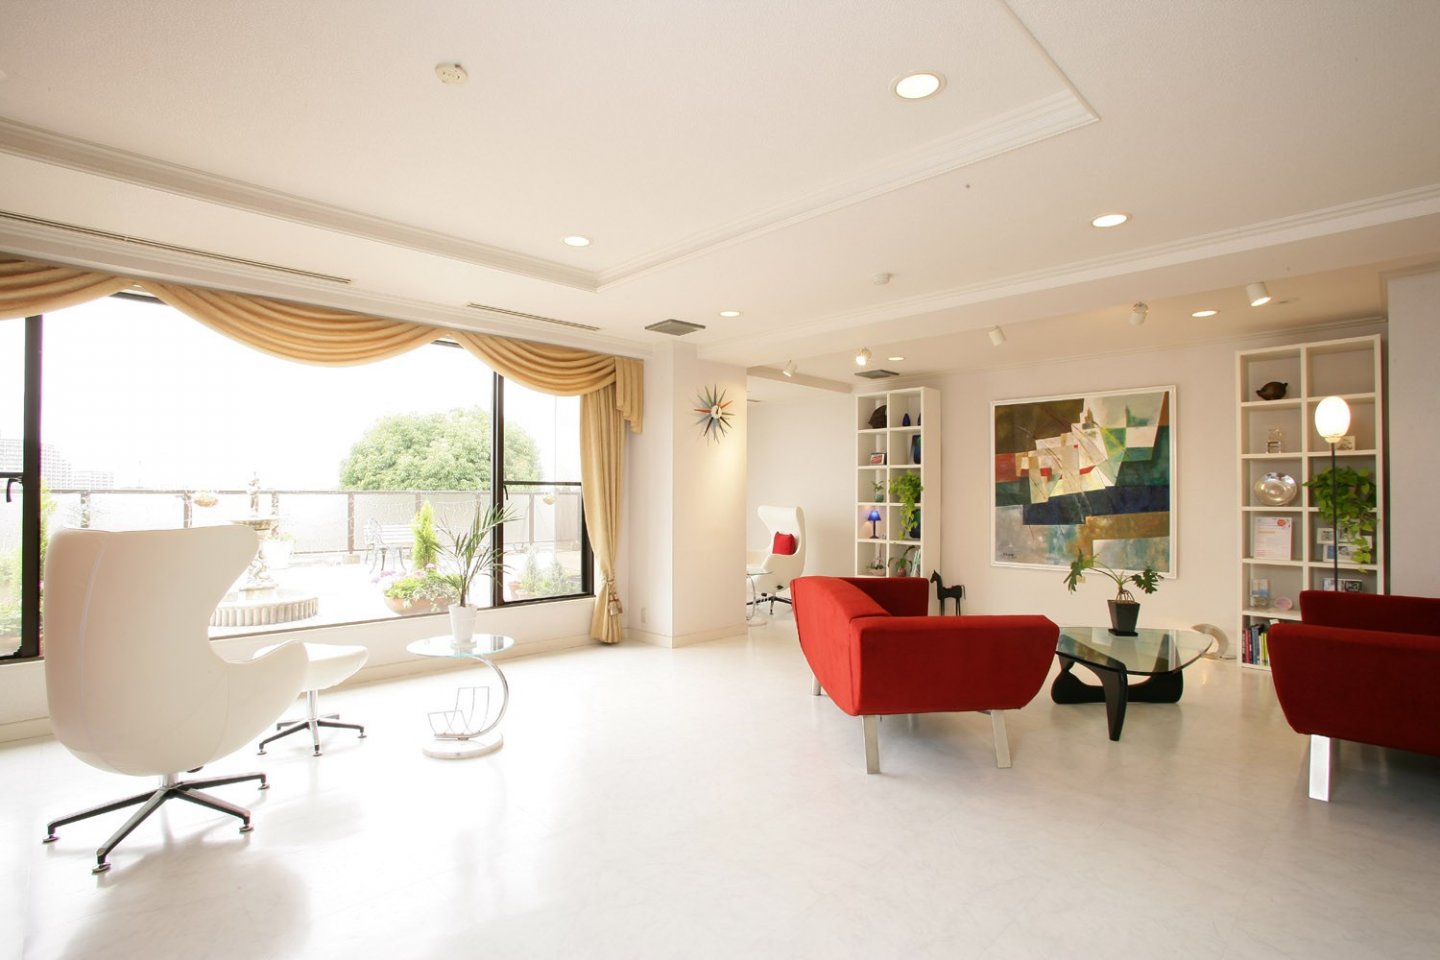 The clinic has a clean & contemporary atmosphere with luxury, tasteful decor and neutral tones